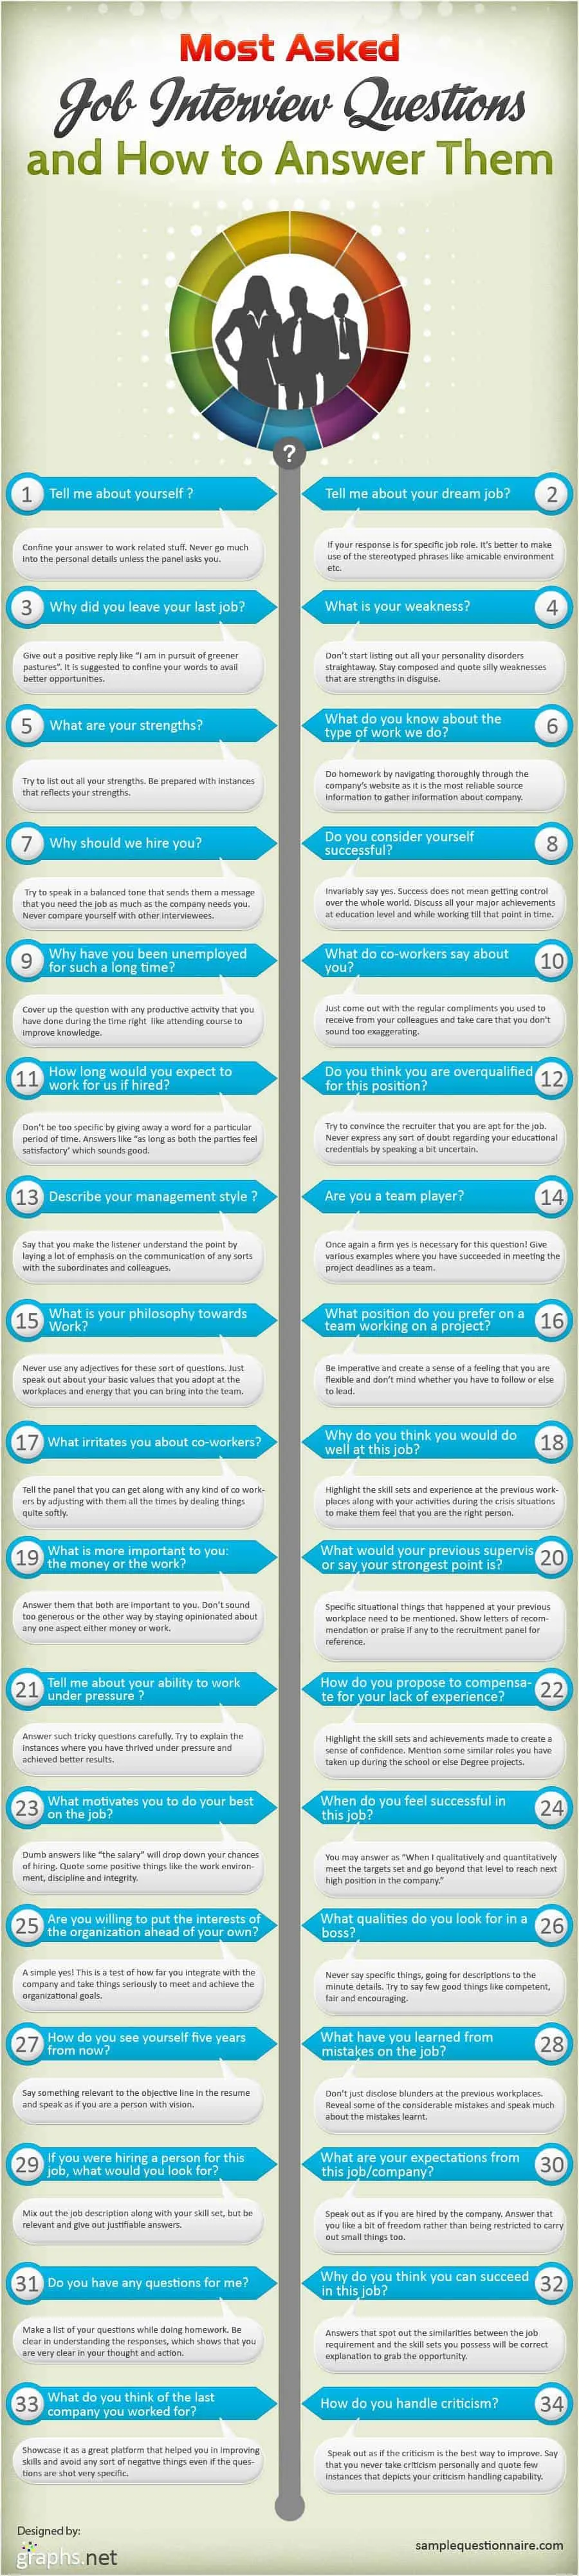 Most Asked Interview Questions Infographic